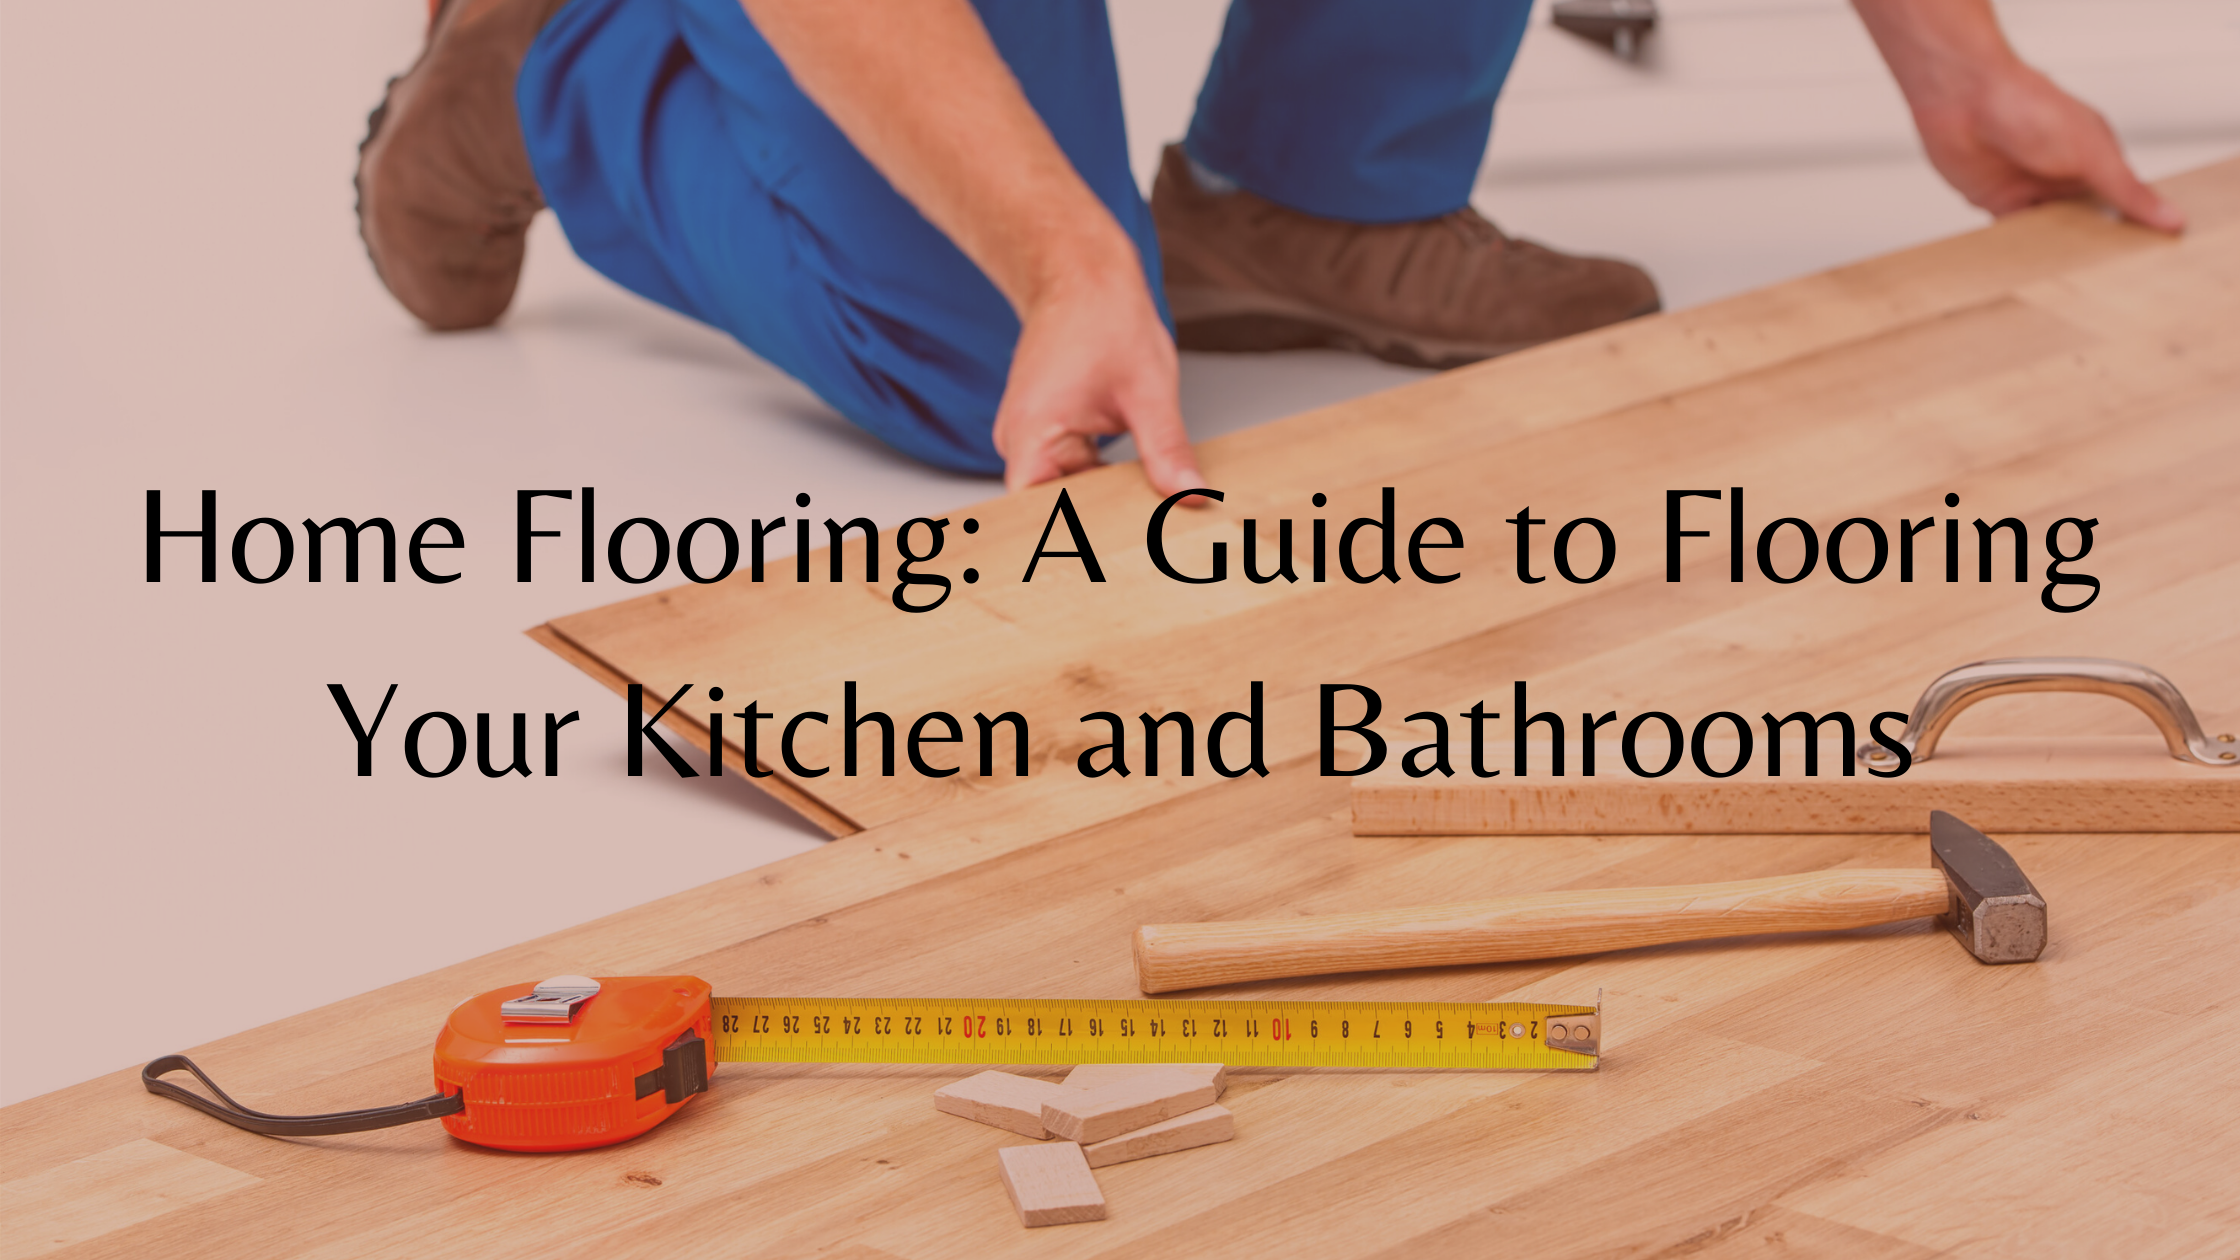 https://www.handymanconnection.net/wp-content/uploads/2021/05/A-Guide-to-Flooring-Your-Kitchen-and-Bathrooms-for-Home-Flooring.png